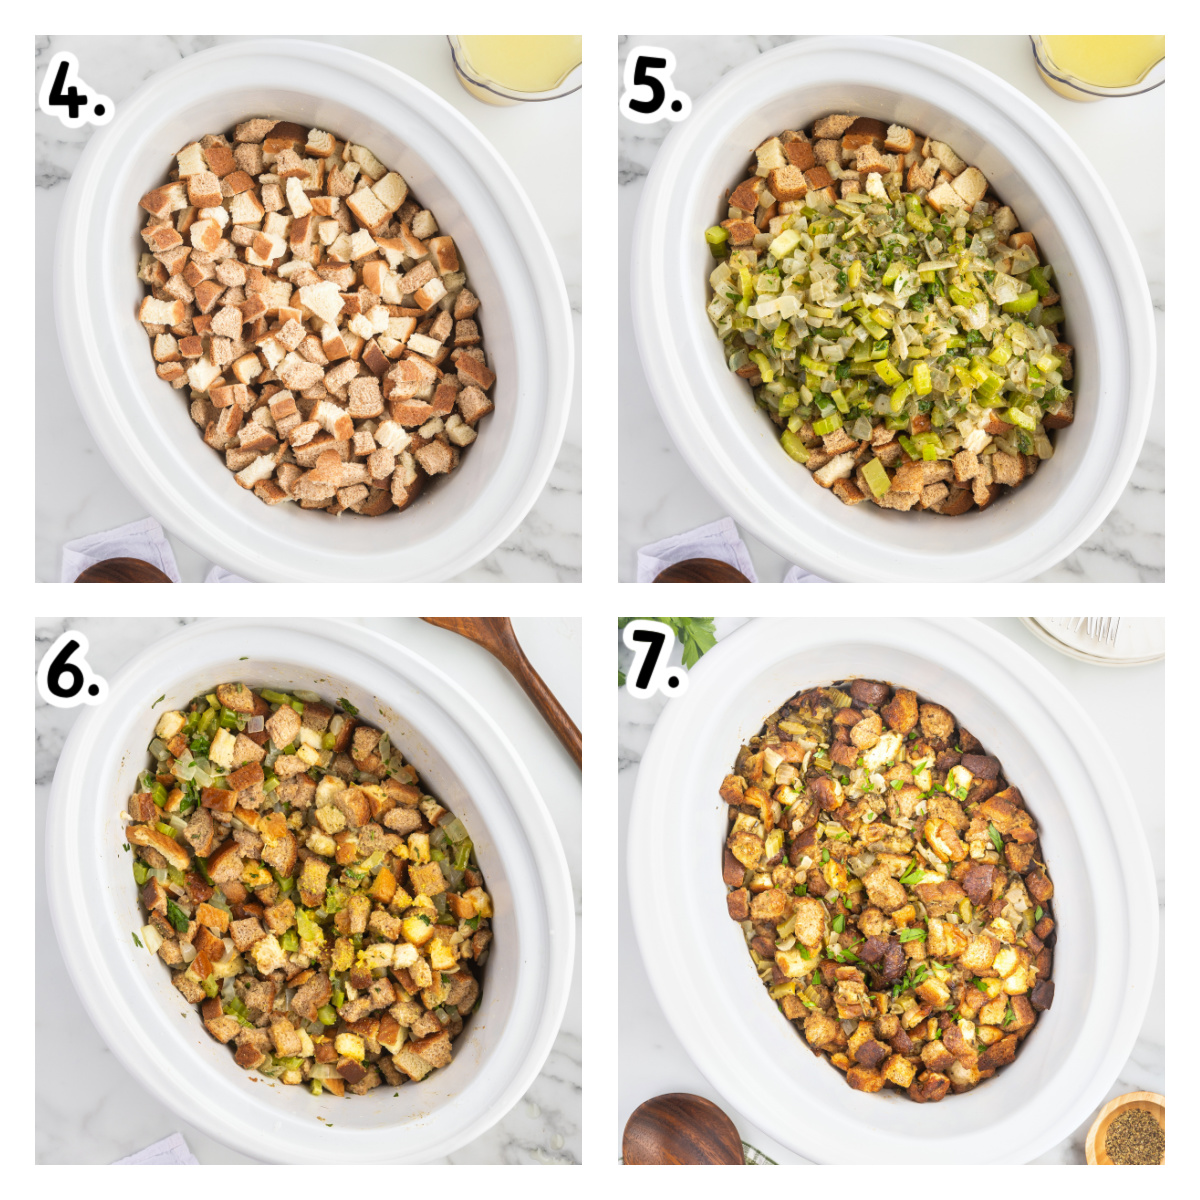 Four images showing how to add bread cubes and vegetables to slow cooker for stuffing.